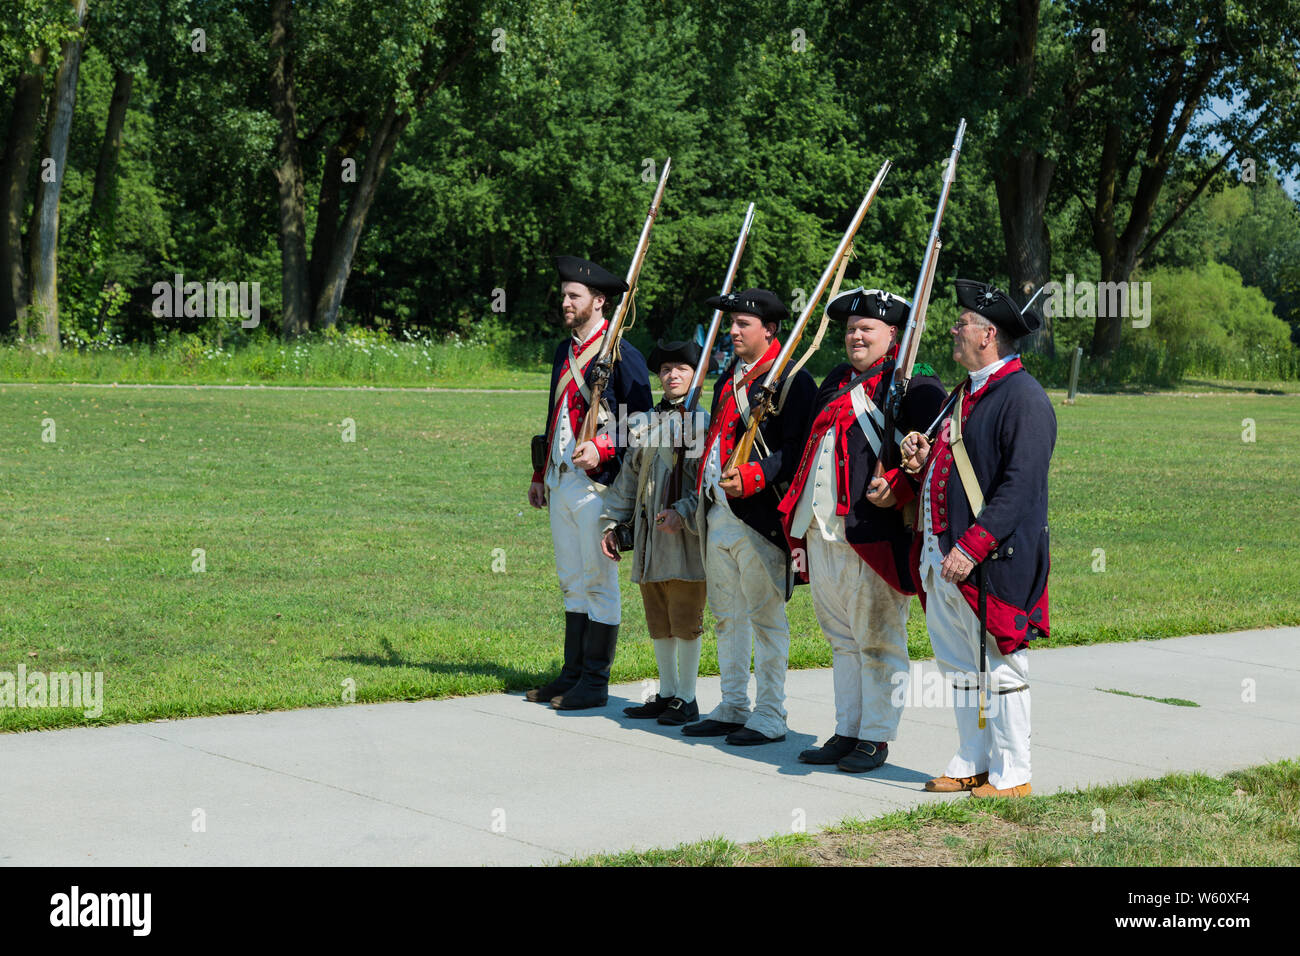 Reenactors in Continental Army uniforms line up in a military formation during an event at Historic Fort Wayne in Fort Wayne, Indiana, USA. Stock Photo